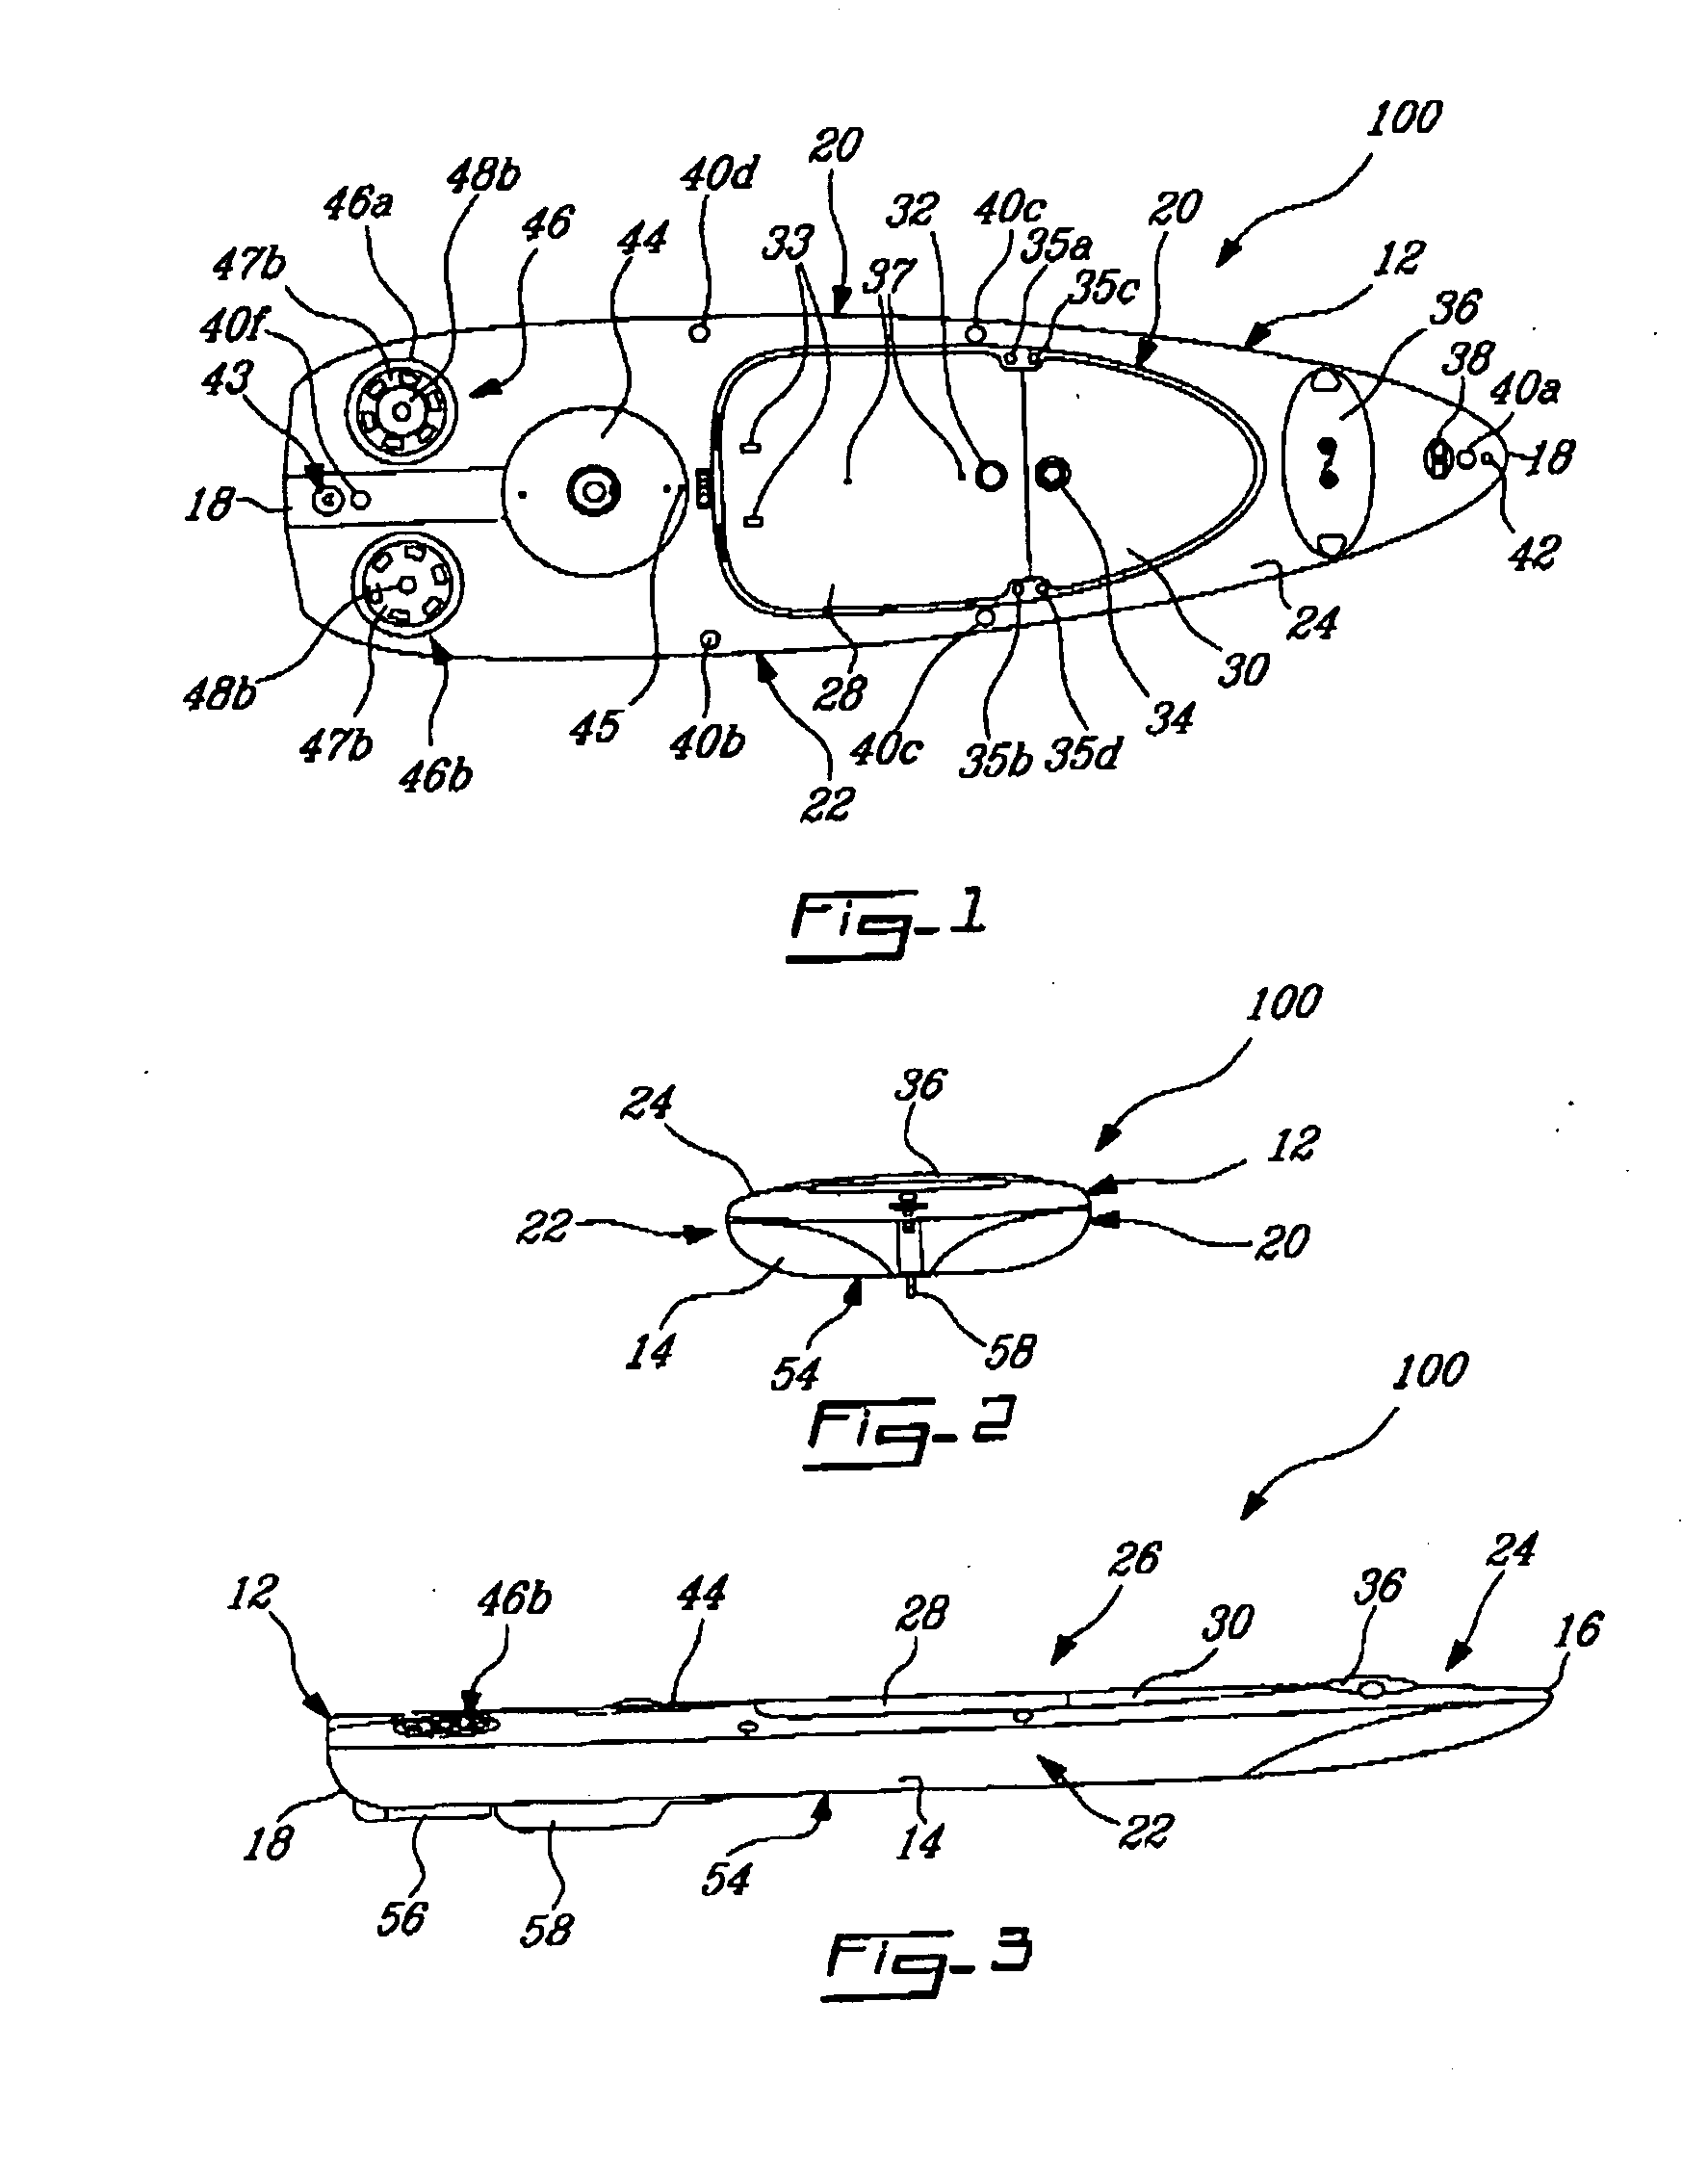 Transformable, Multifunctional and Self-Stowage Watercraft